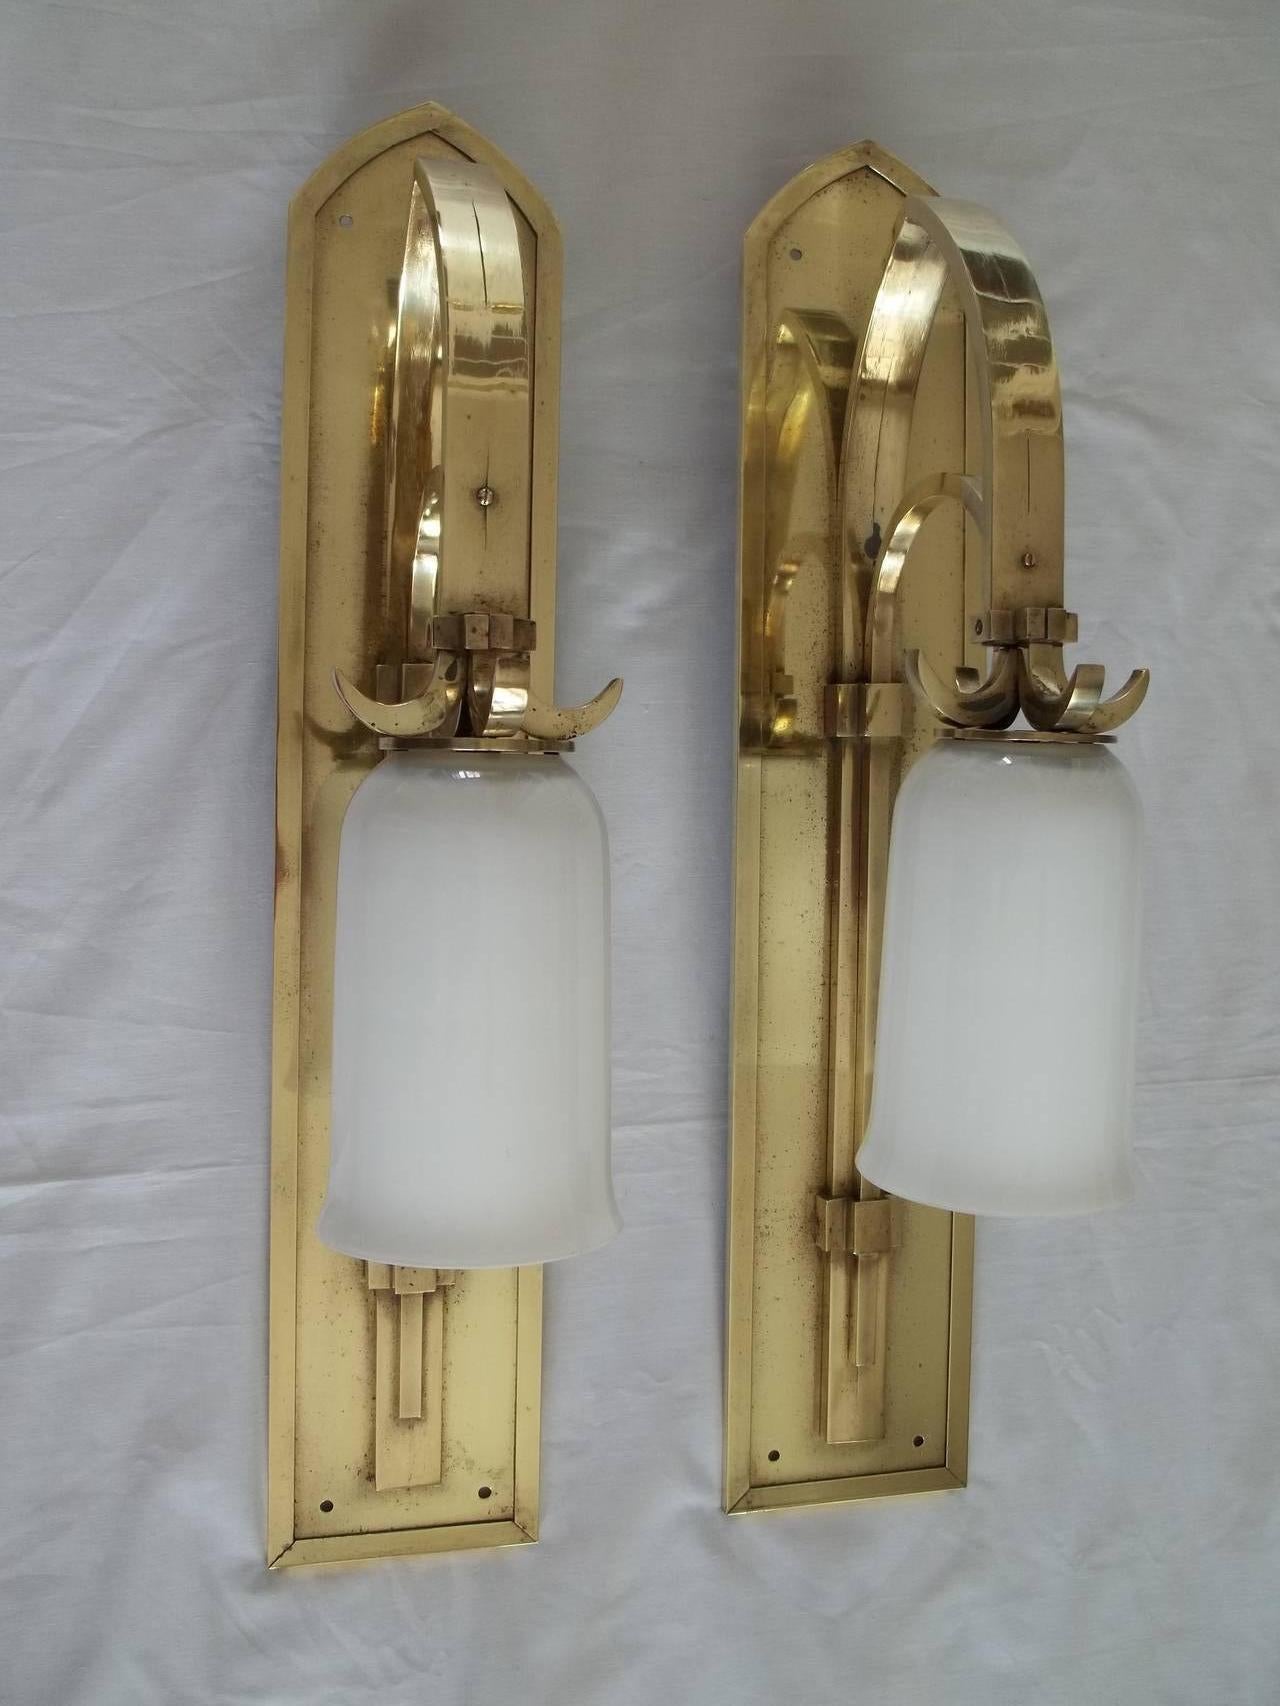 These are a superb PAIR of WALL LAMPs in the Gothic Revival style, circa 1900 to 1910.

These lamps are substantial and very well made in heavy brass.

The lamps are supported by a twin arched frame the upper outer arch having a well defined